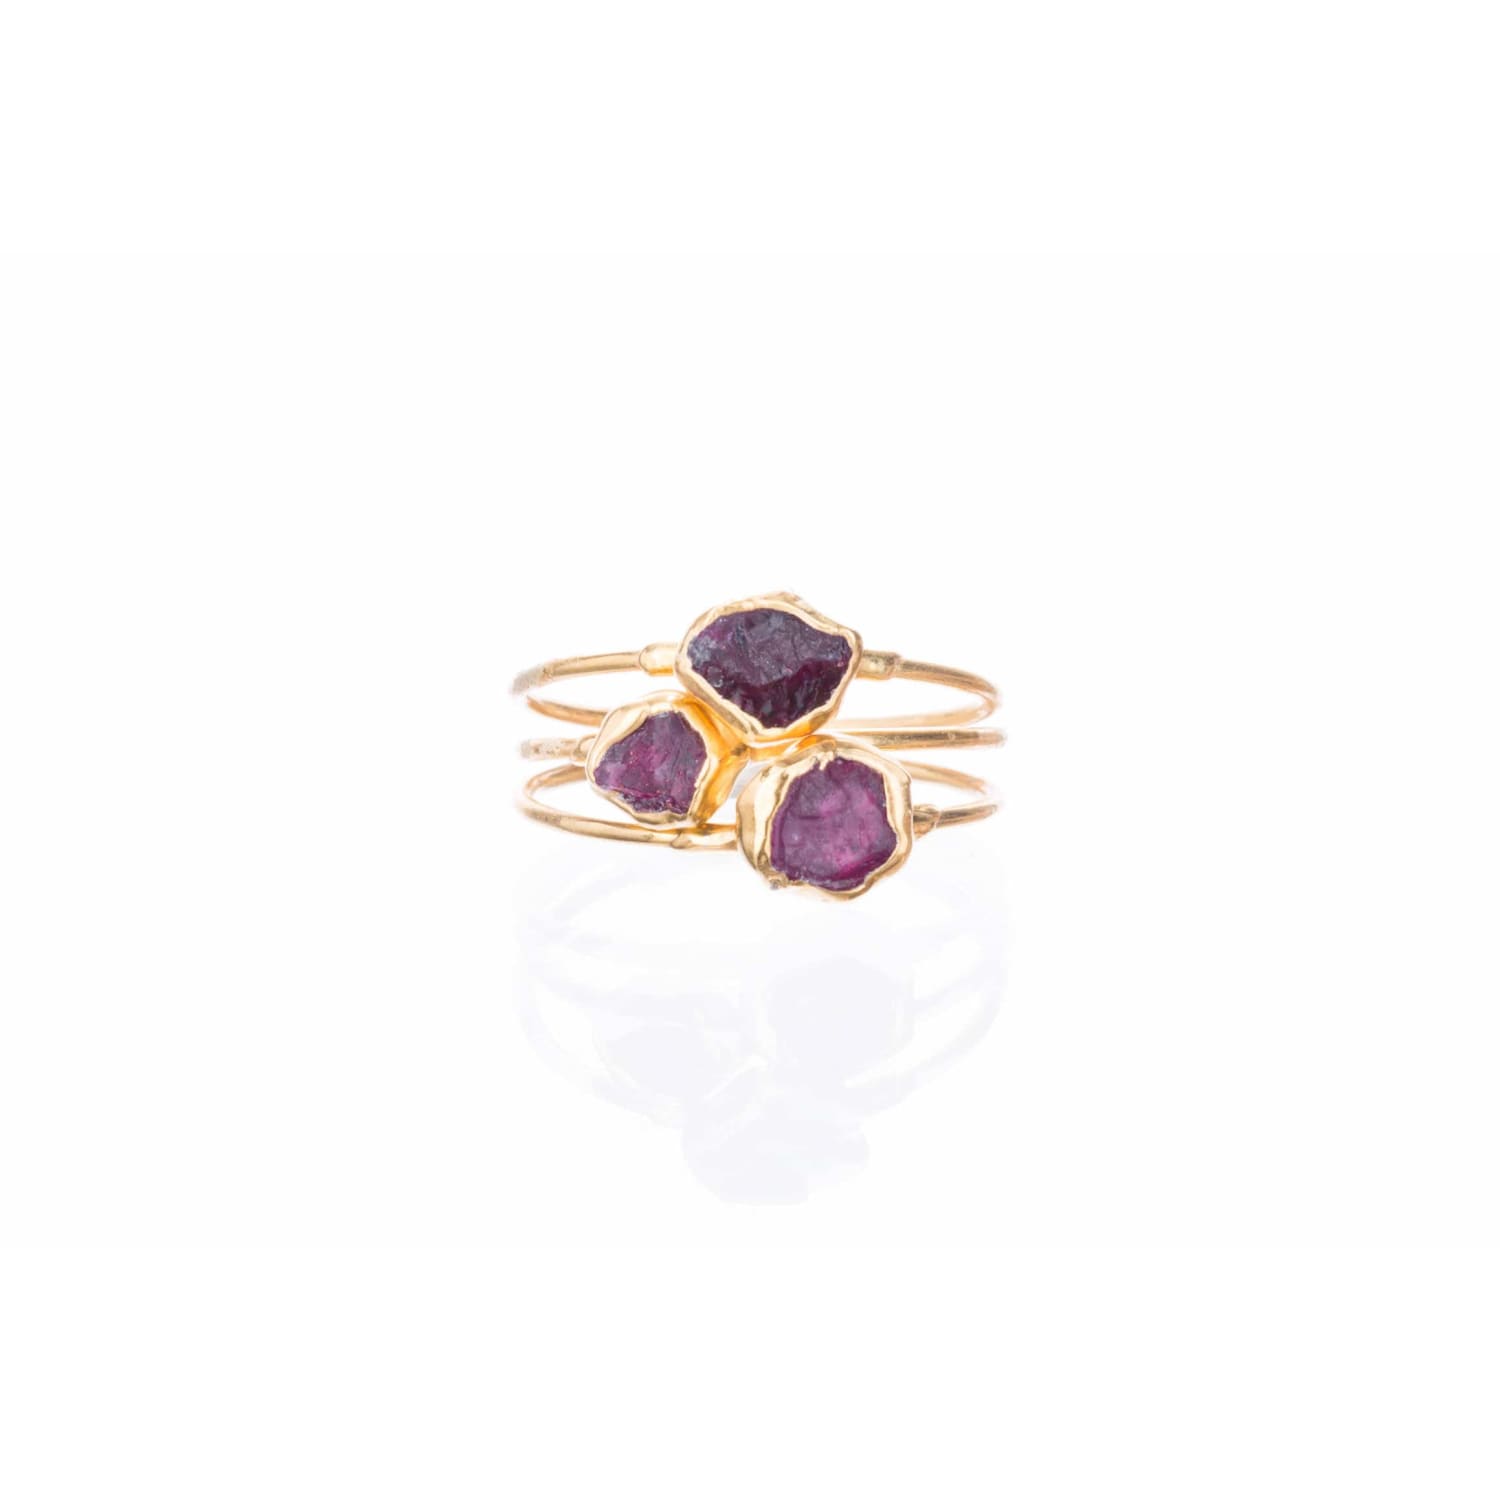 Raw Ruby Ring for Women in Sterling Silver Gemstone Jewelry